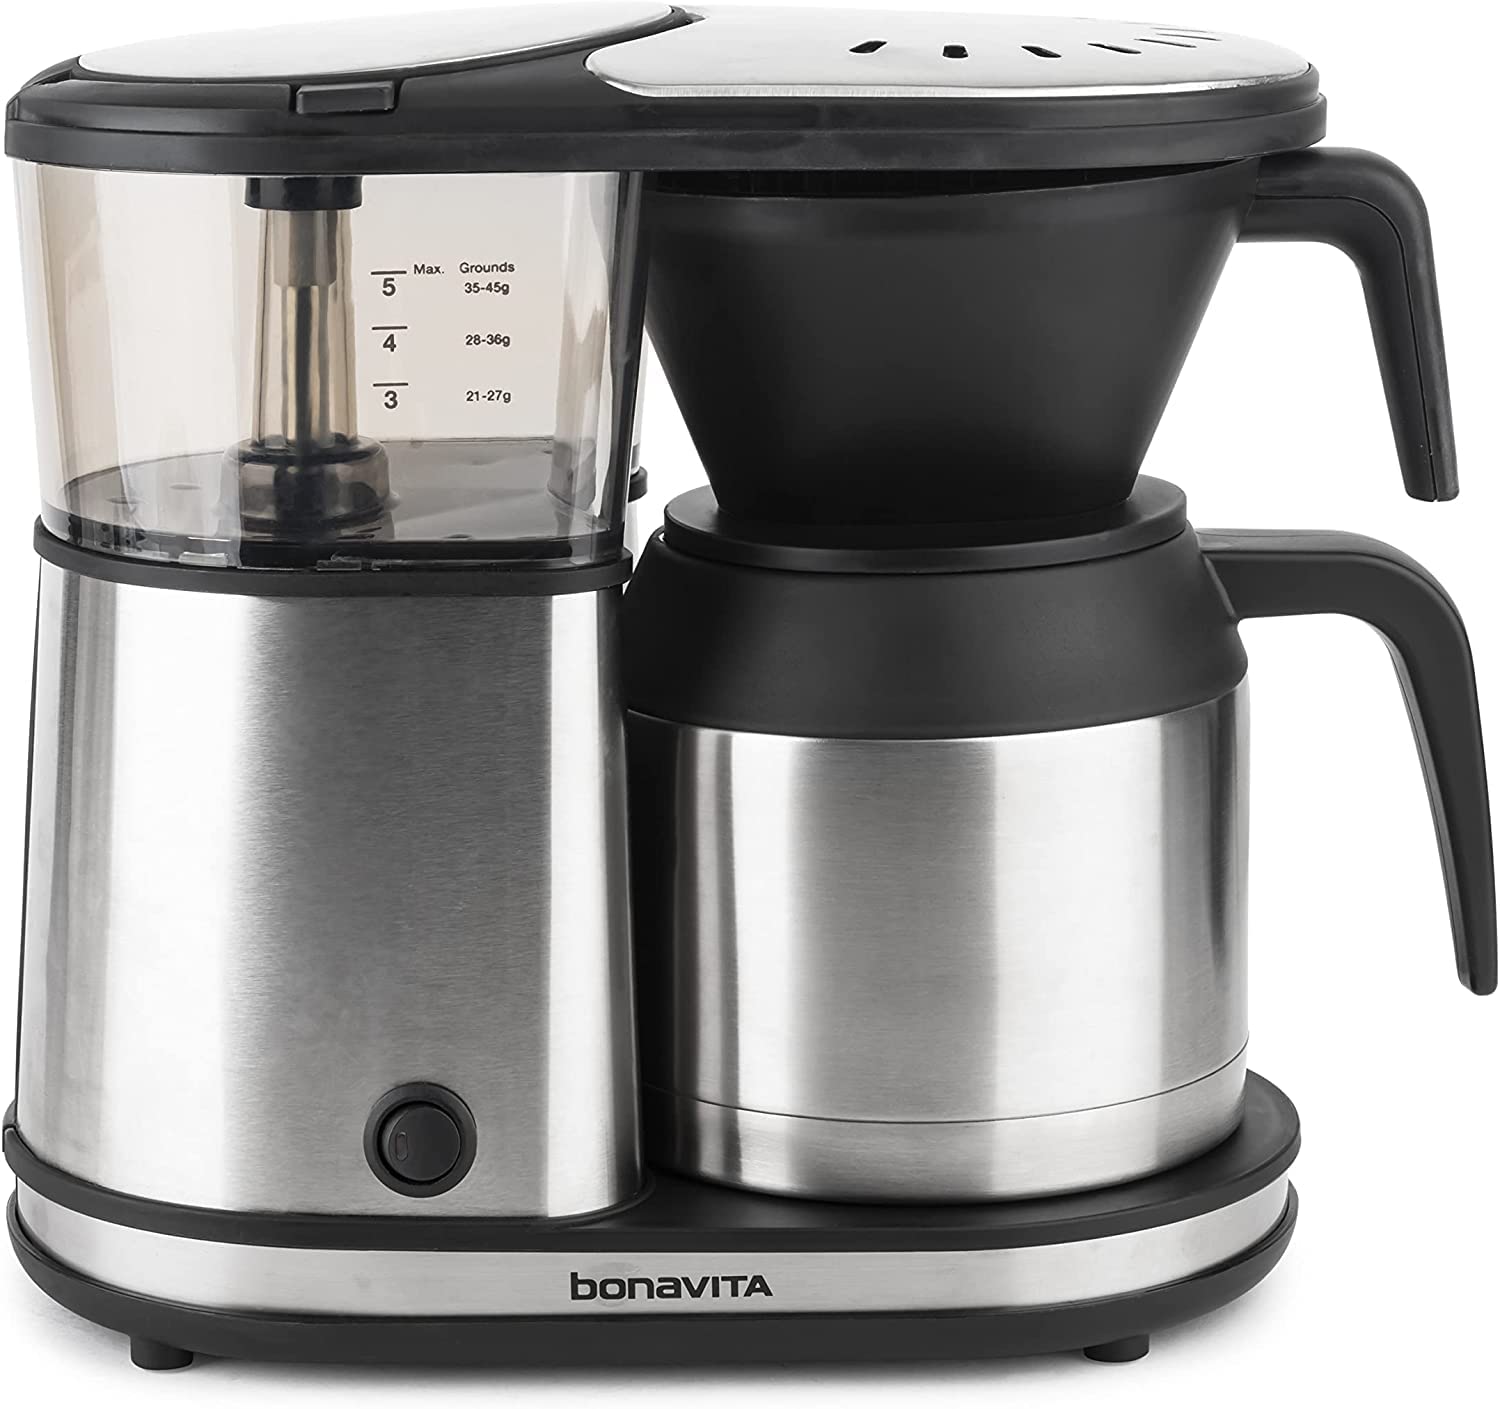 8 Best 5 Cup Coffee Makers Reviews & Pros and Cons Queek Coffee